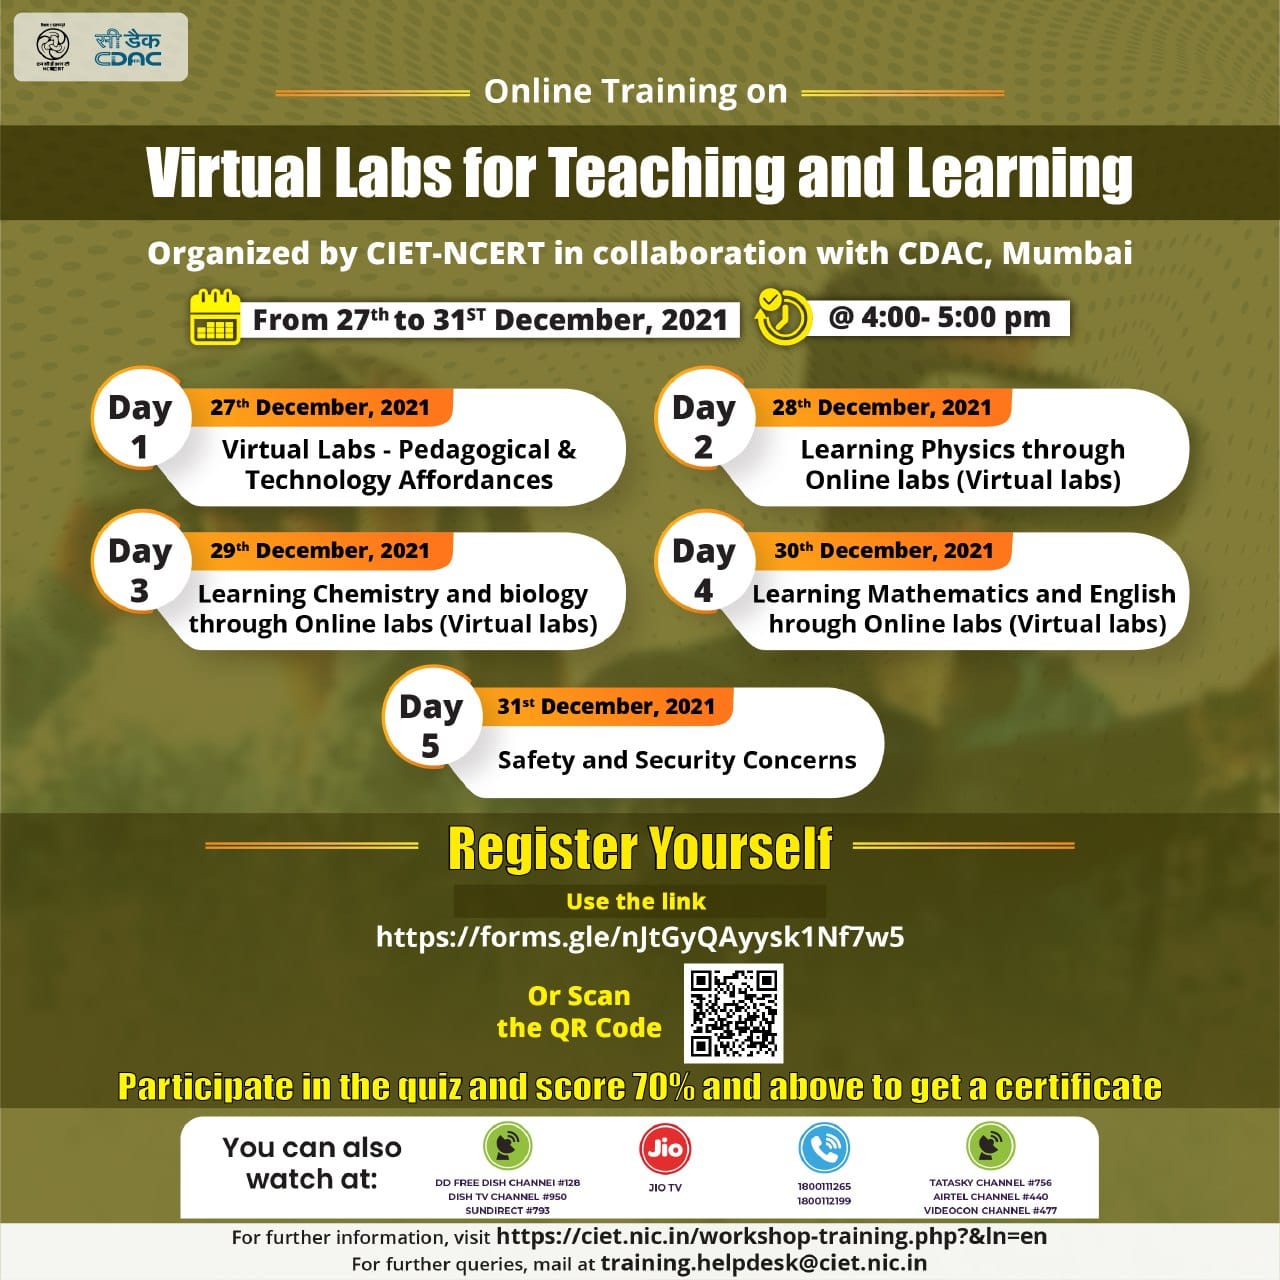 Online Training on “Teaching Learning through Learning Management System (LMS)” Image